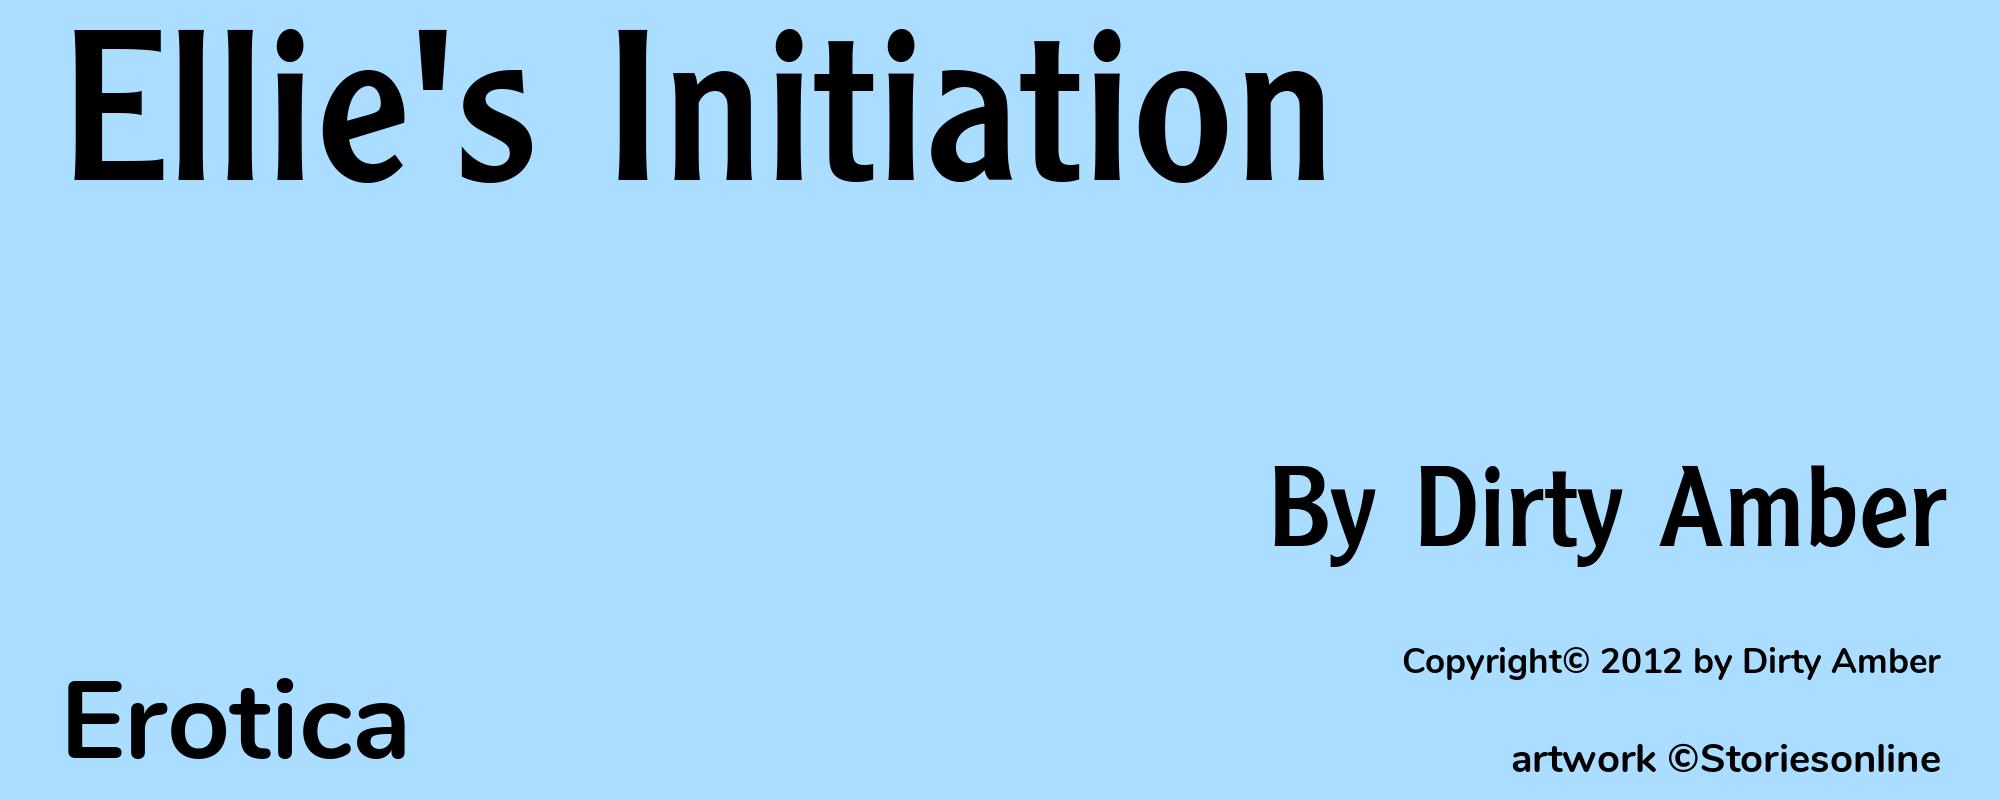 Ellie's Initiation - Cover